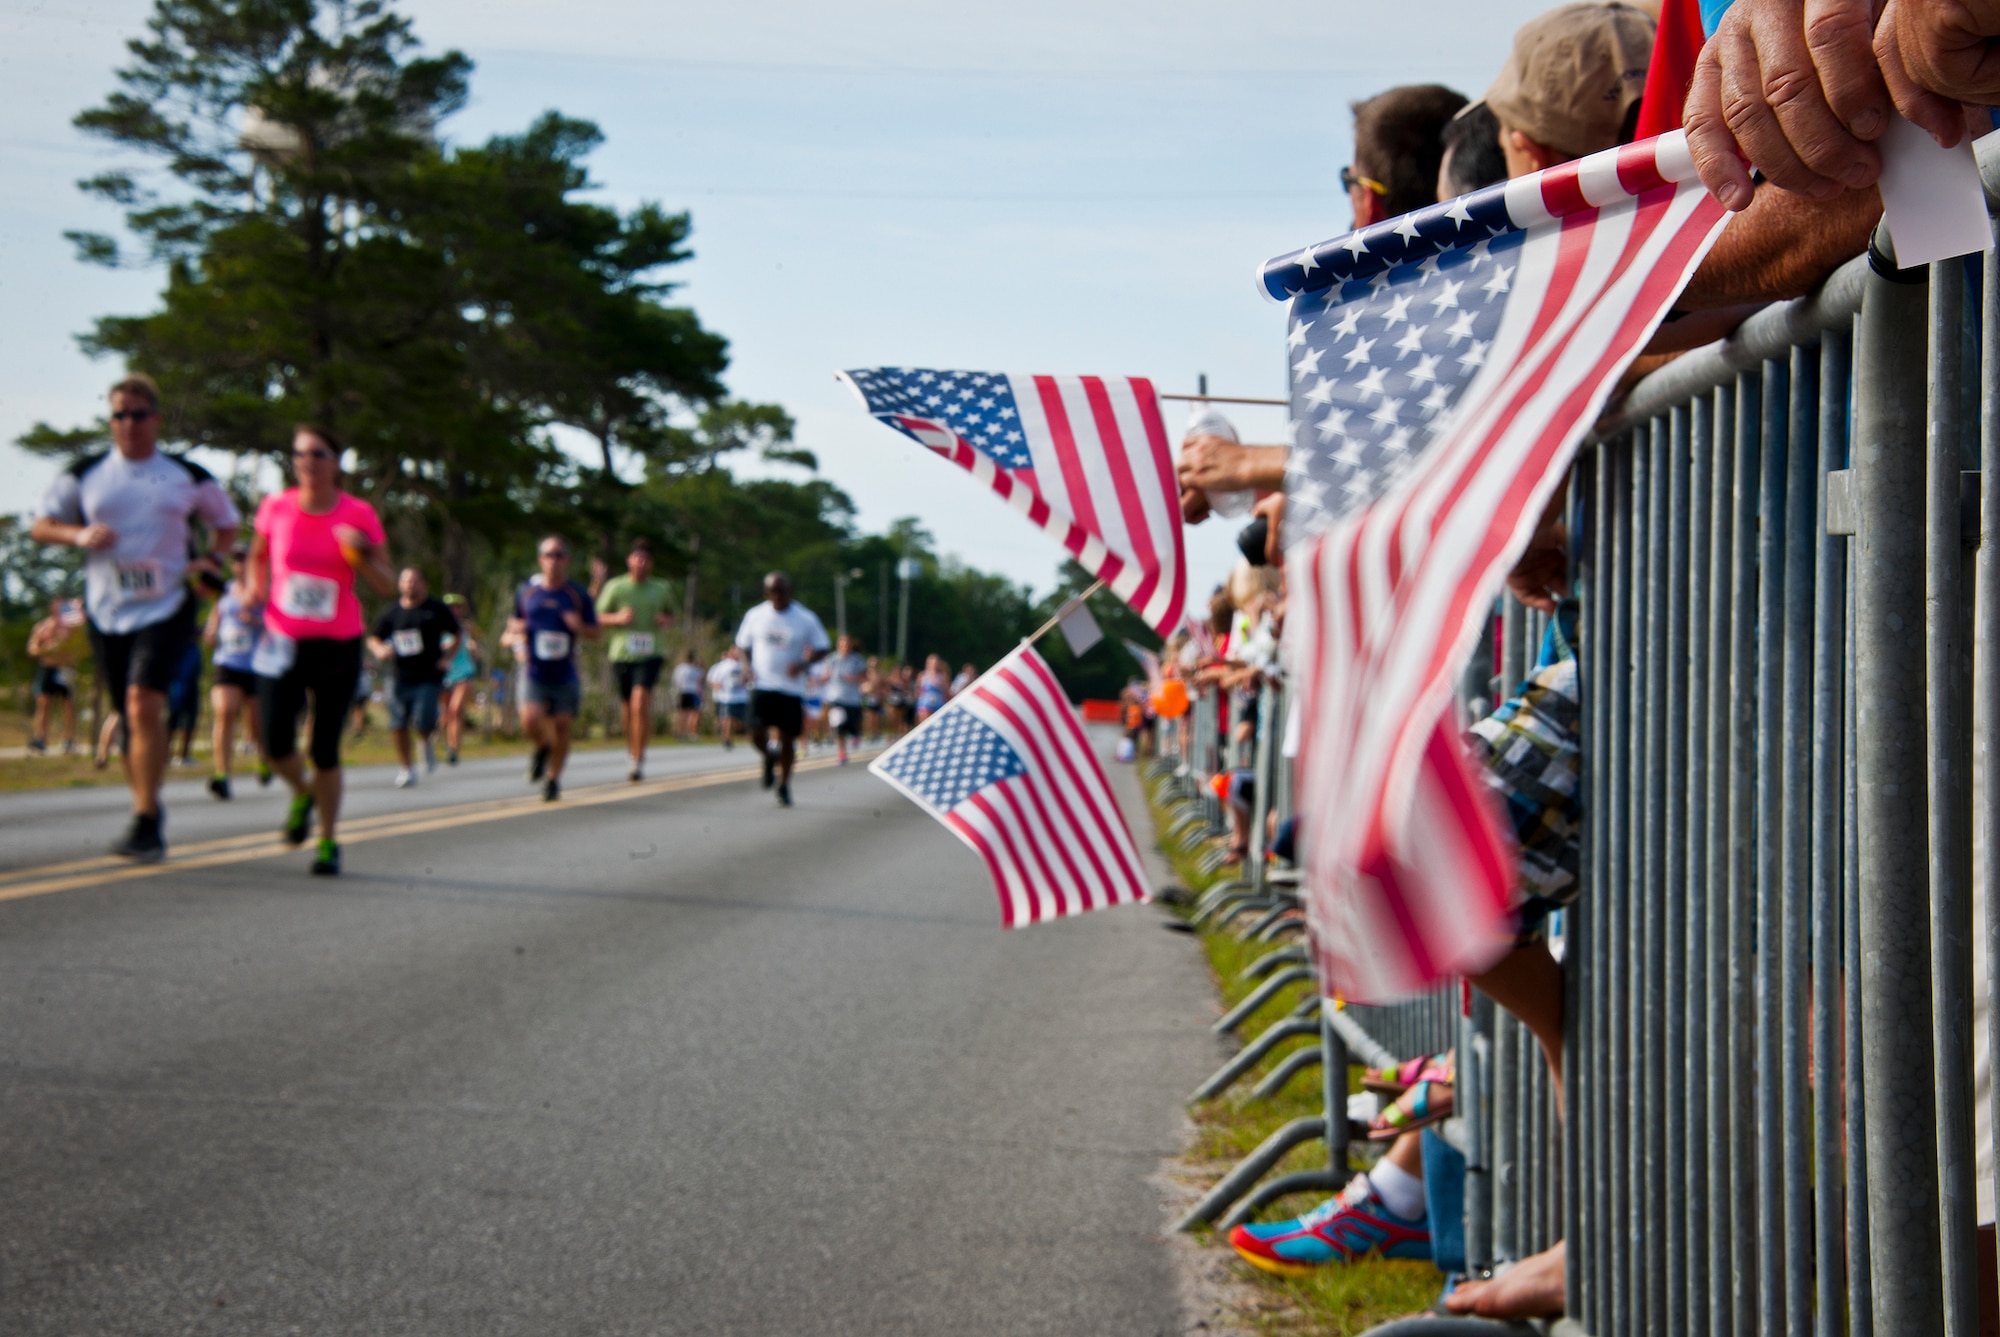 Flags were waved as the runners sprinted to the finish line at the 28th annual Gate-to-Gate Run May 27 at Eglin Air Force Base, Fla. More than 1,500 people participated in the Memorial Day race.  Many of the runners paid their respects by dropping off flowers in front of the All Wars Memorial as they raced by.  (U.S. Air Force photo/Samuel King Jr.)